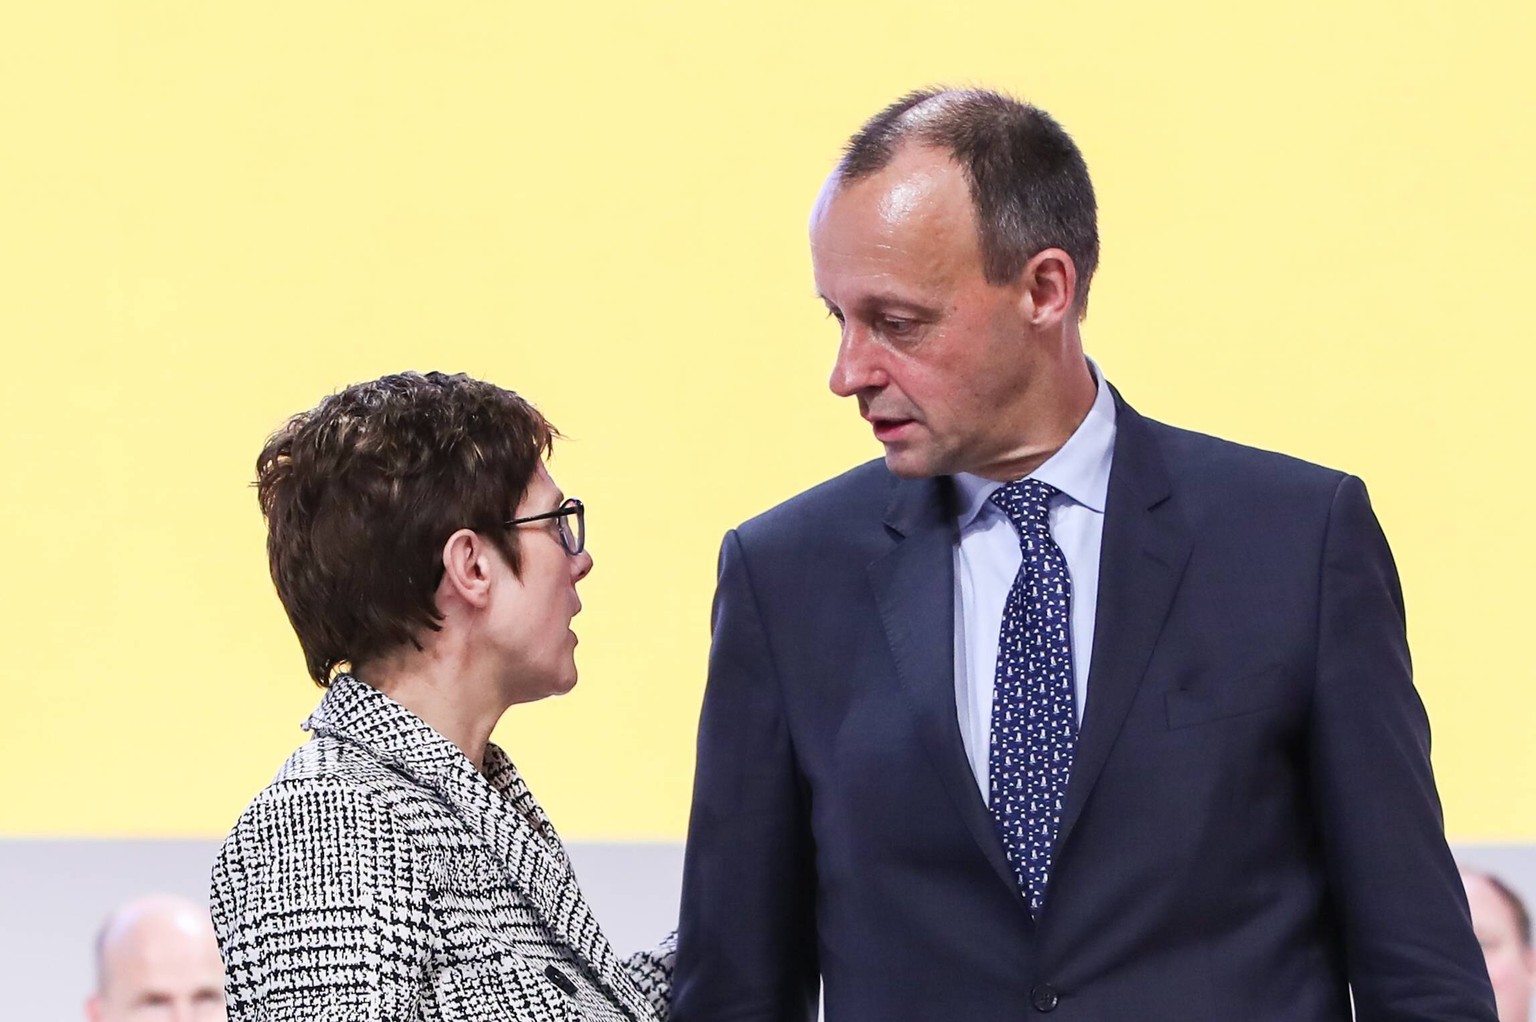 181208 -- HAMBURG, Dec. 8, 2018 -- Newly-elected chairperson of Germany s Christian Democratic Union CDU Annegret Kramp-Karrenbauer L talks with Friedrich Merz during the party conference of CDU in Ha ...